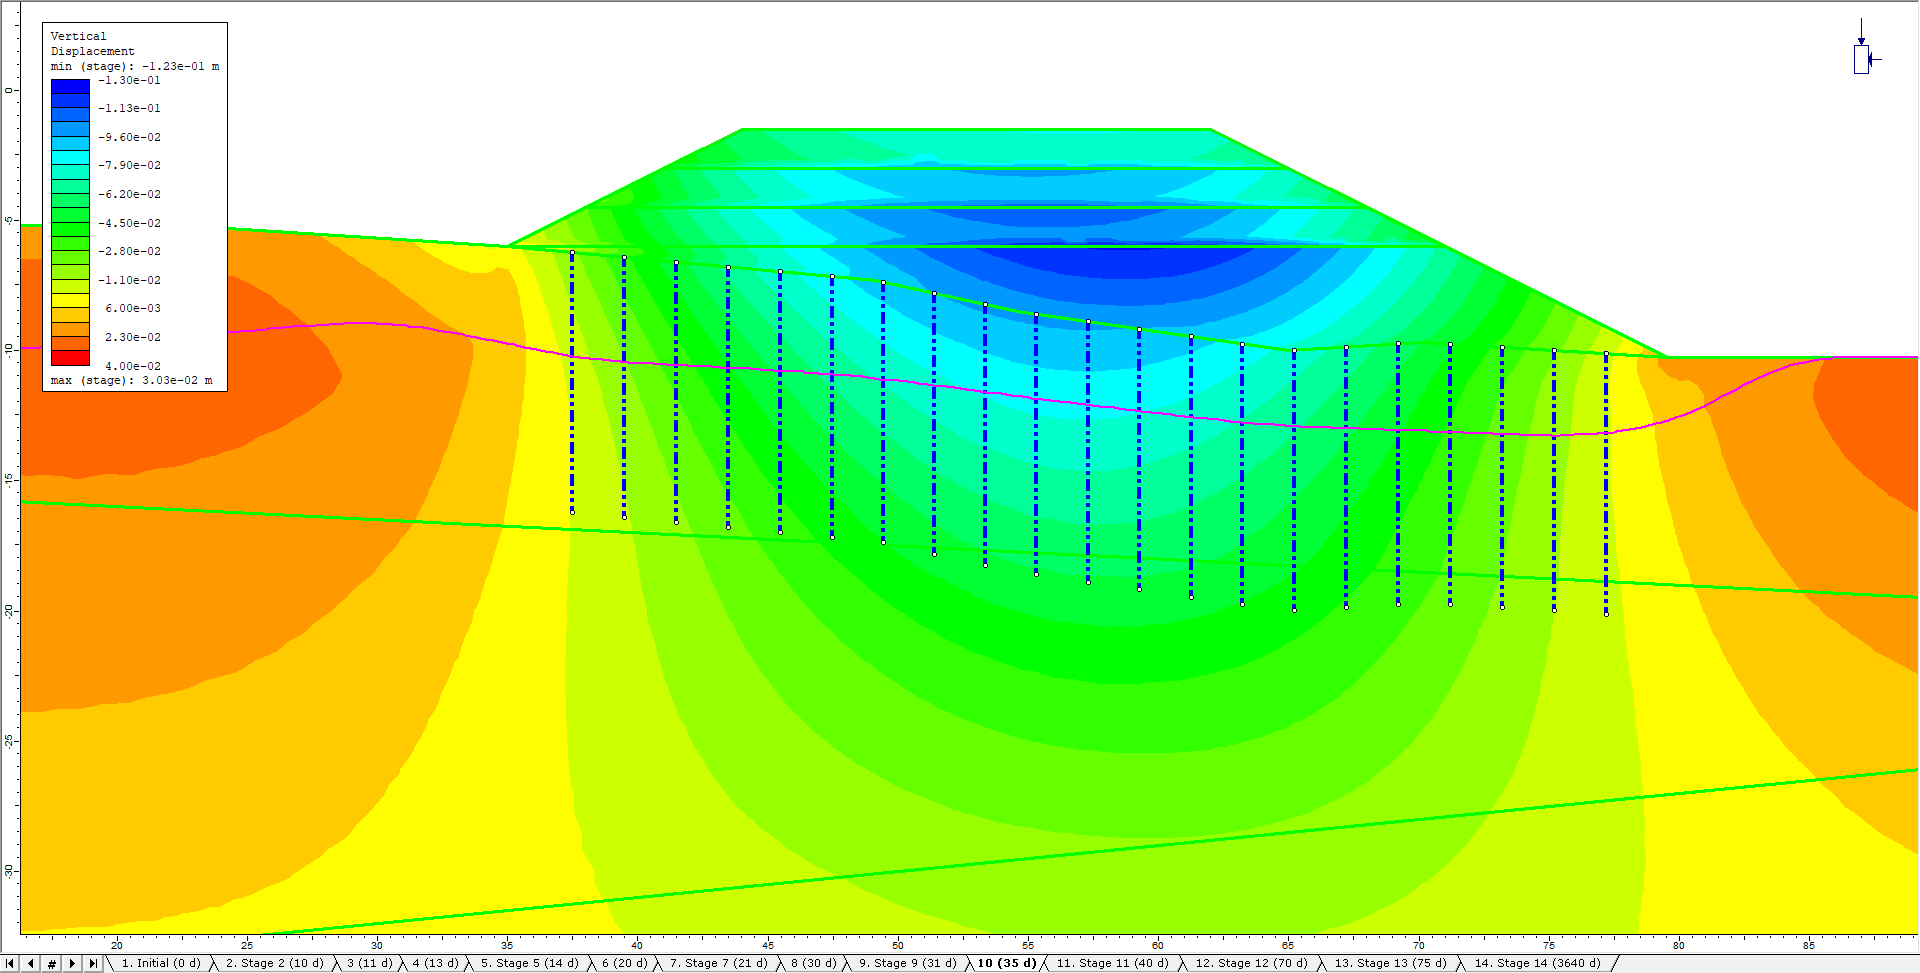 Figure 6. Contoured view of embankment vertical displacement with wick drain installation and vacuum consolidation